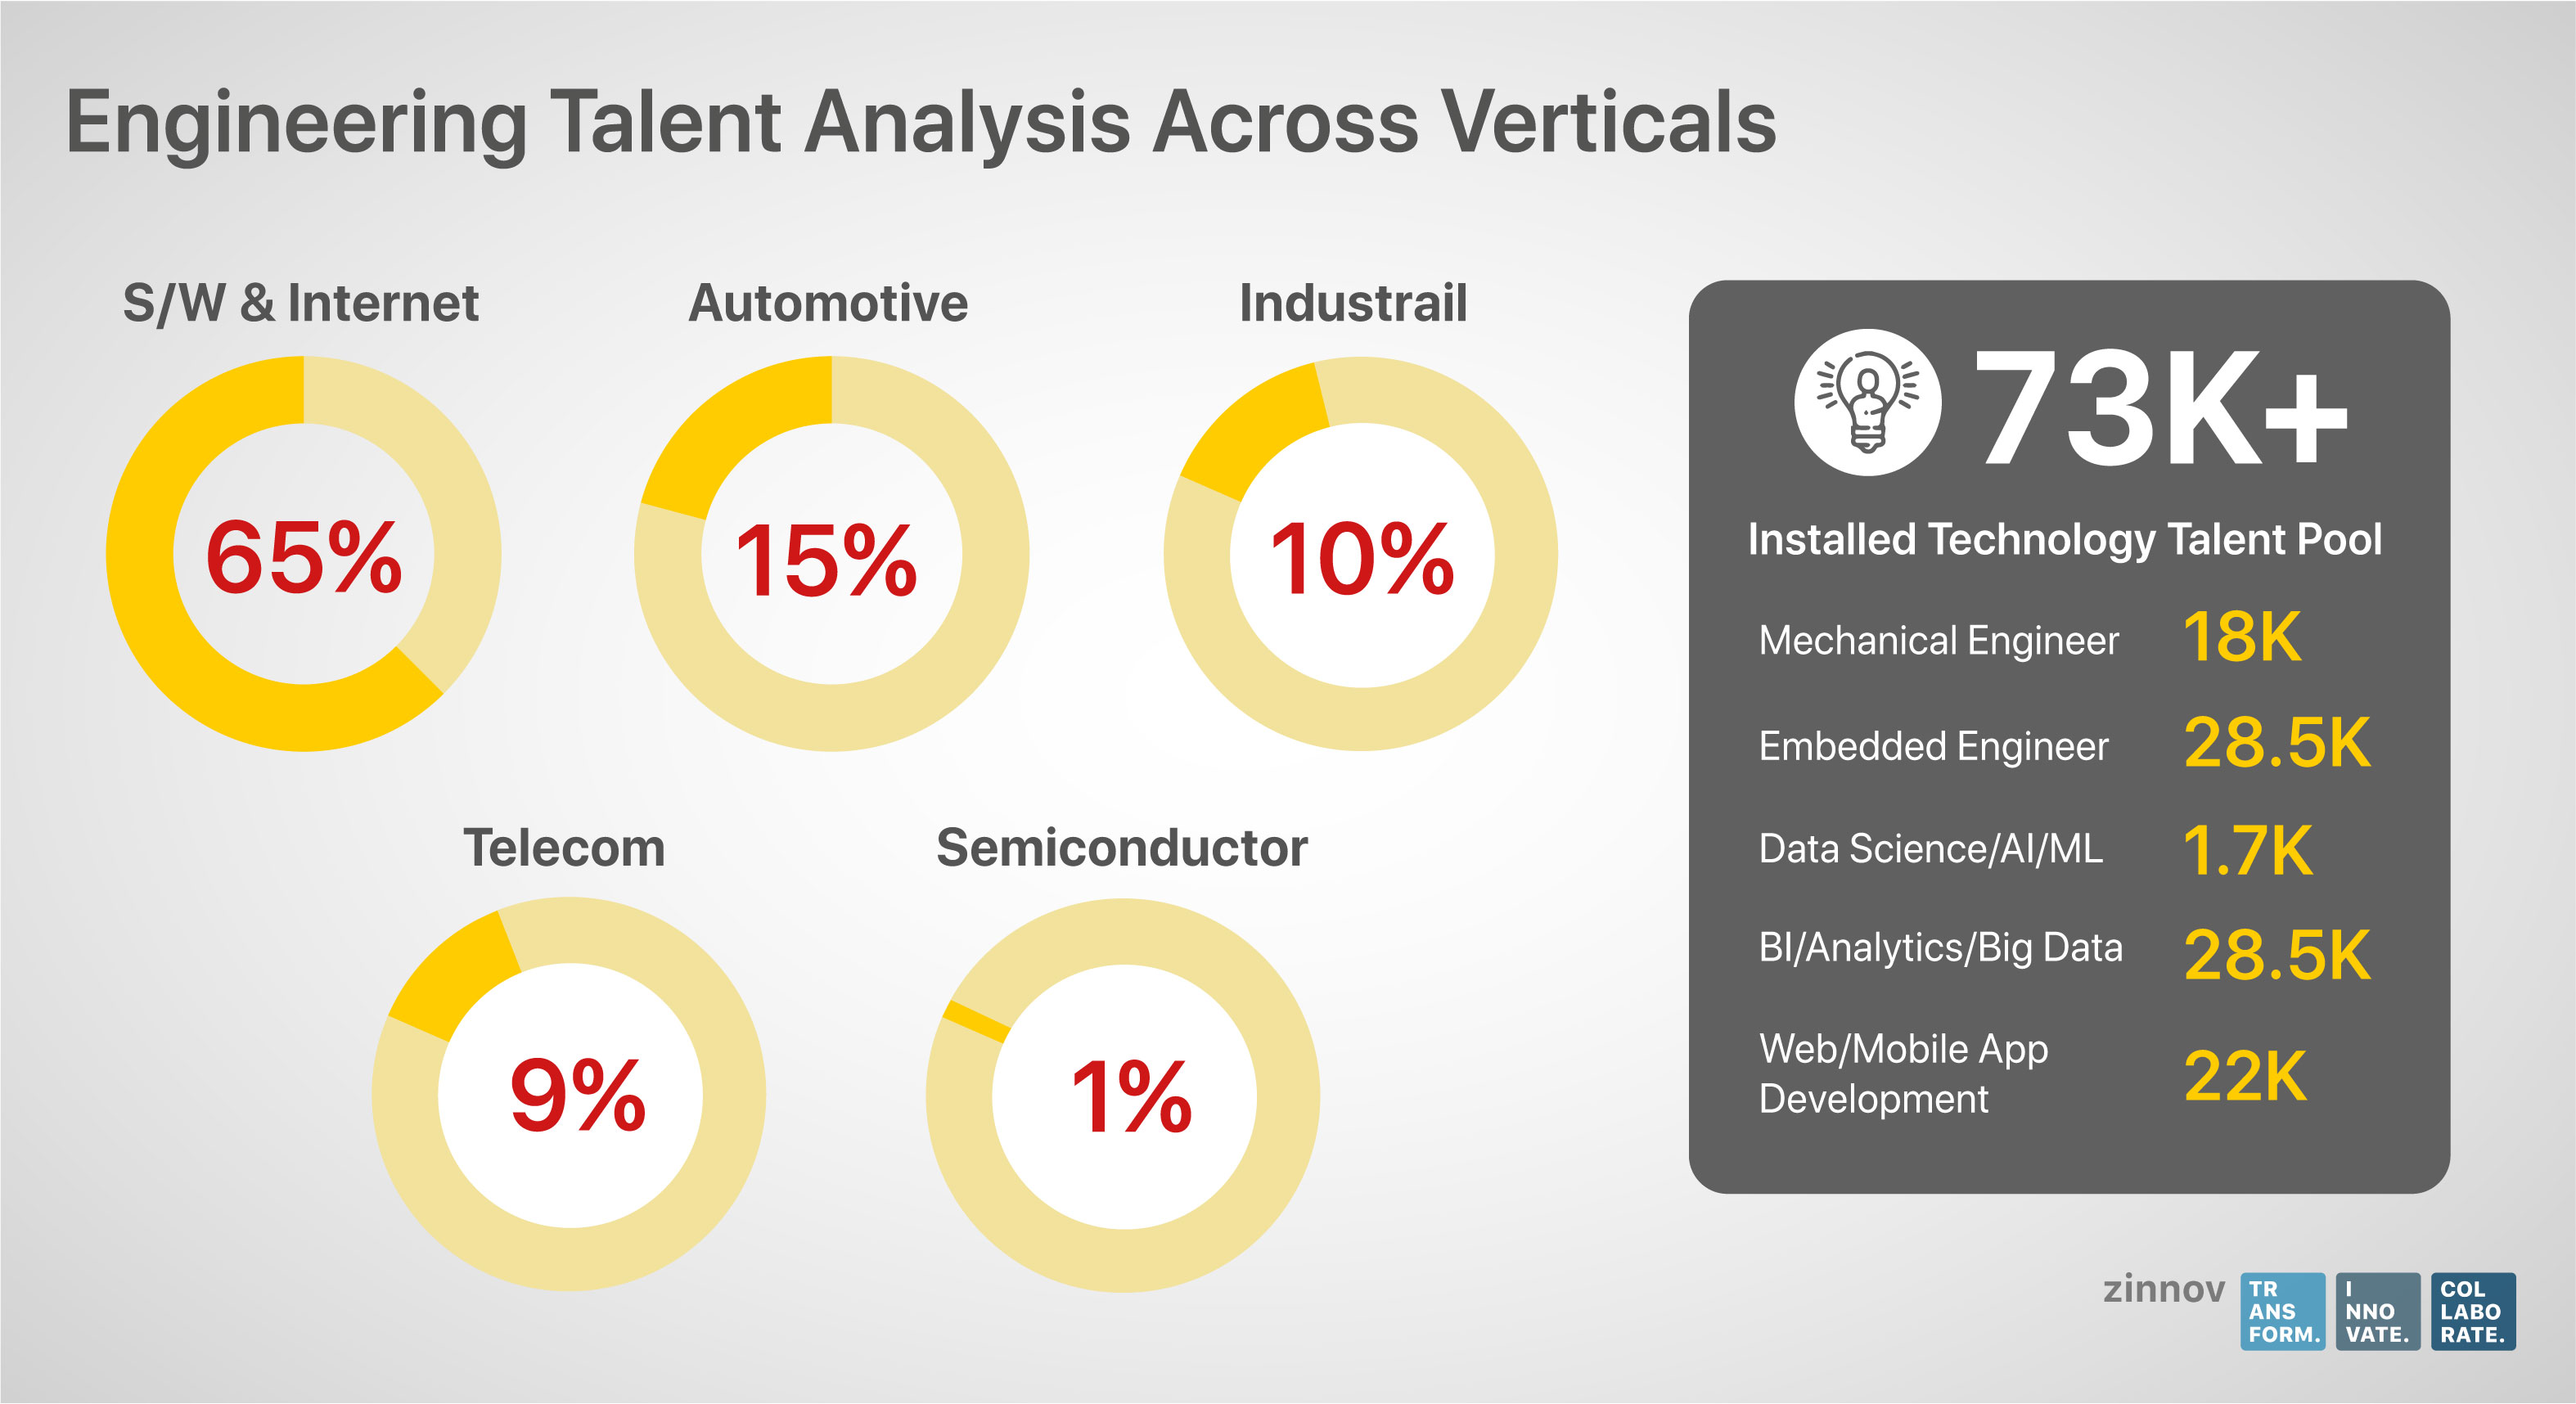 Romania IT and Engineering Talent Analysis Across Verticals